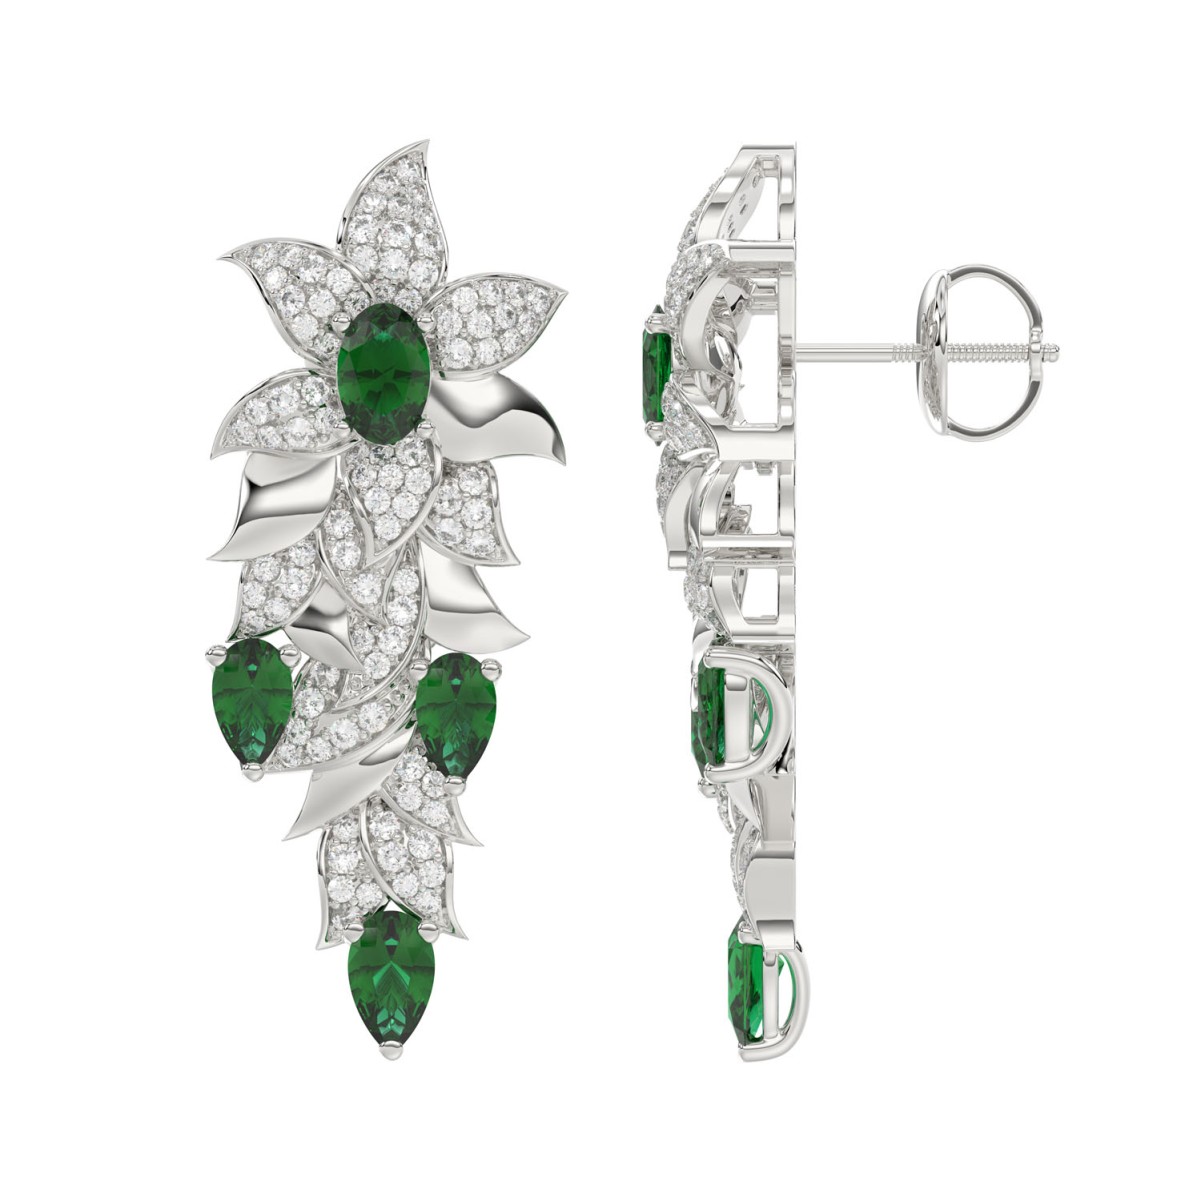 18K WHITE GOLD 3 5/8CT ROUND/OVAL/PEAR DIAMOND LADIES EARRINGS(COLOR STONE GREEN EMERALD OVAL 1CT/PEAR DIAMOND 1 1/2CT)